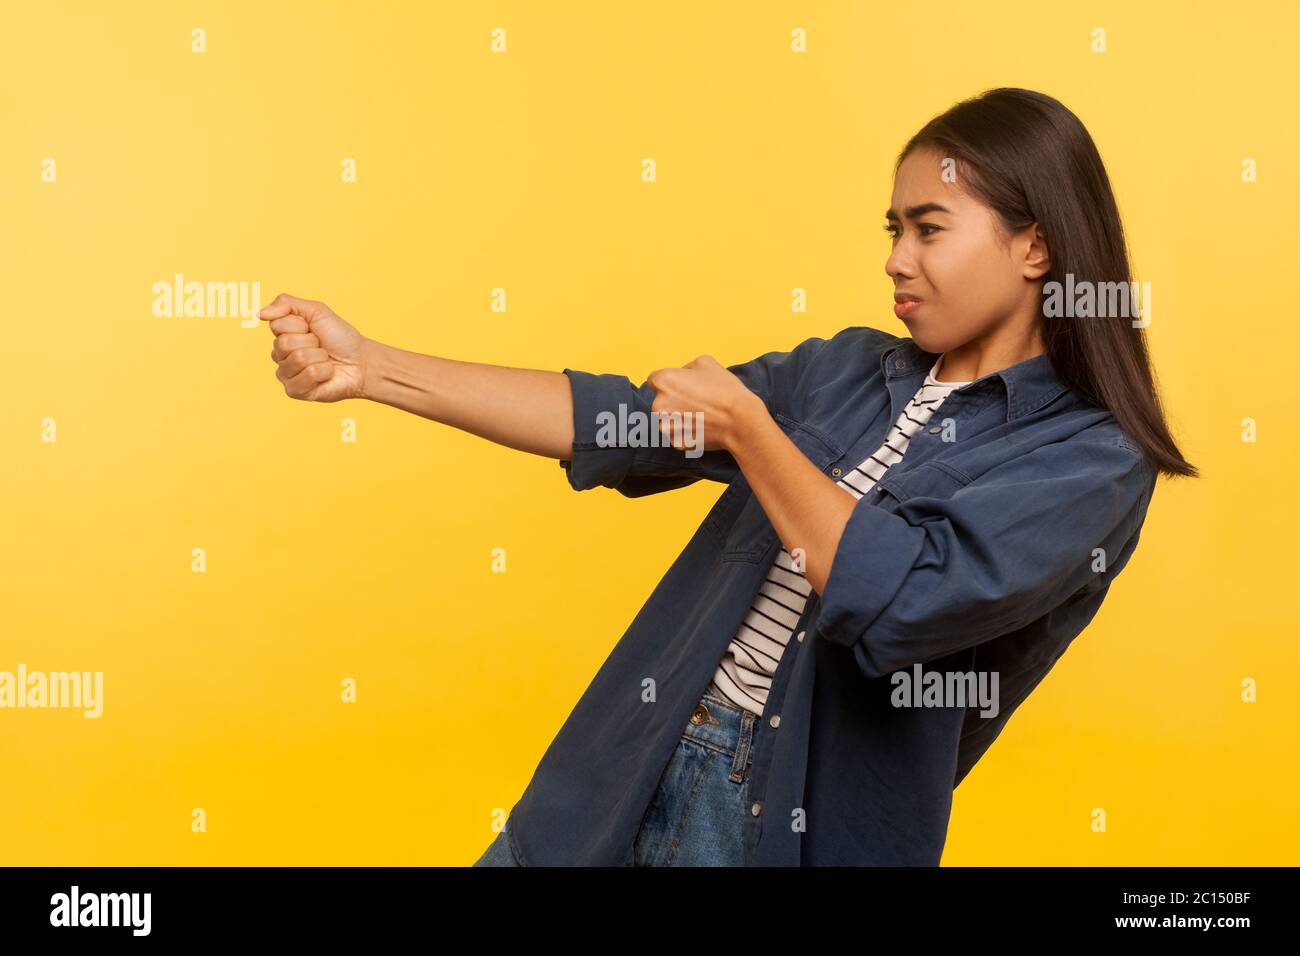 Portrait of diligent purposeful girl in denim shirt pulling invisible heavy burden, striving hard to achieve success, dragging with persistence. indoo Stock Photo